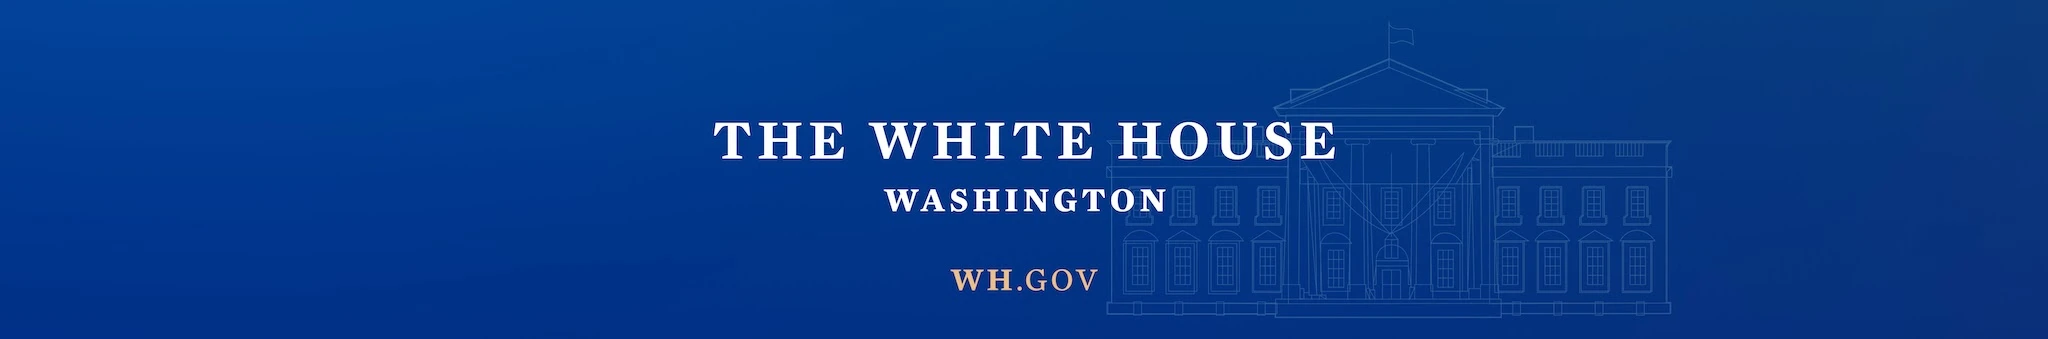 The White House's BANNER